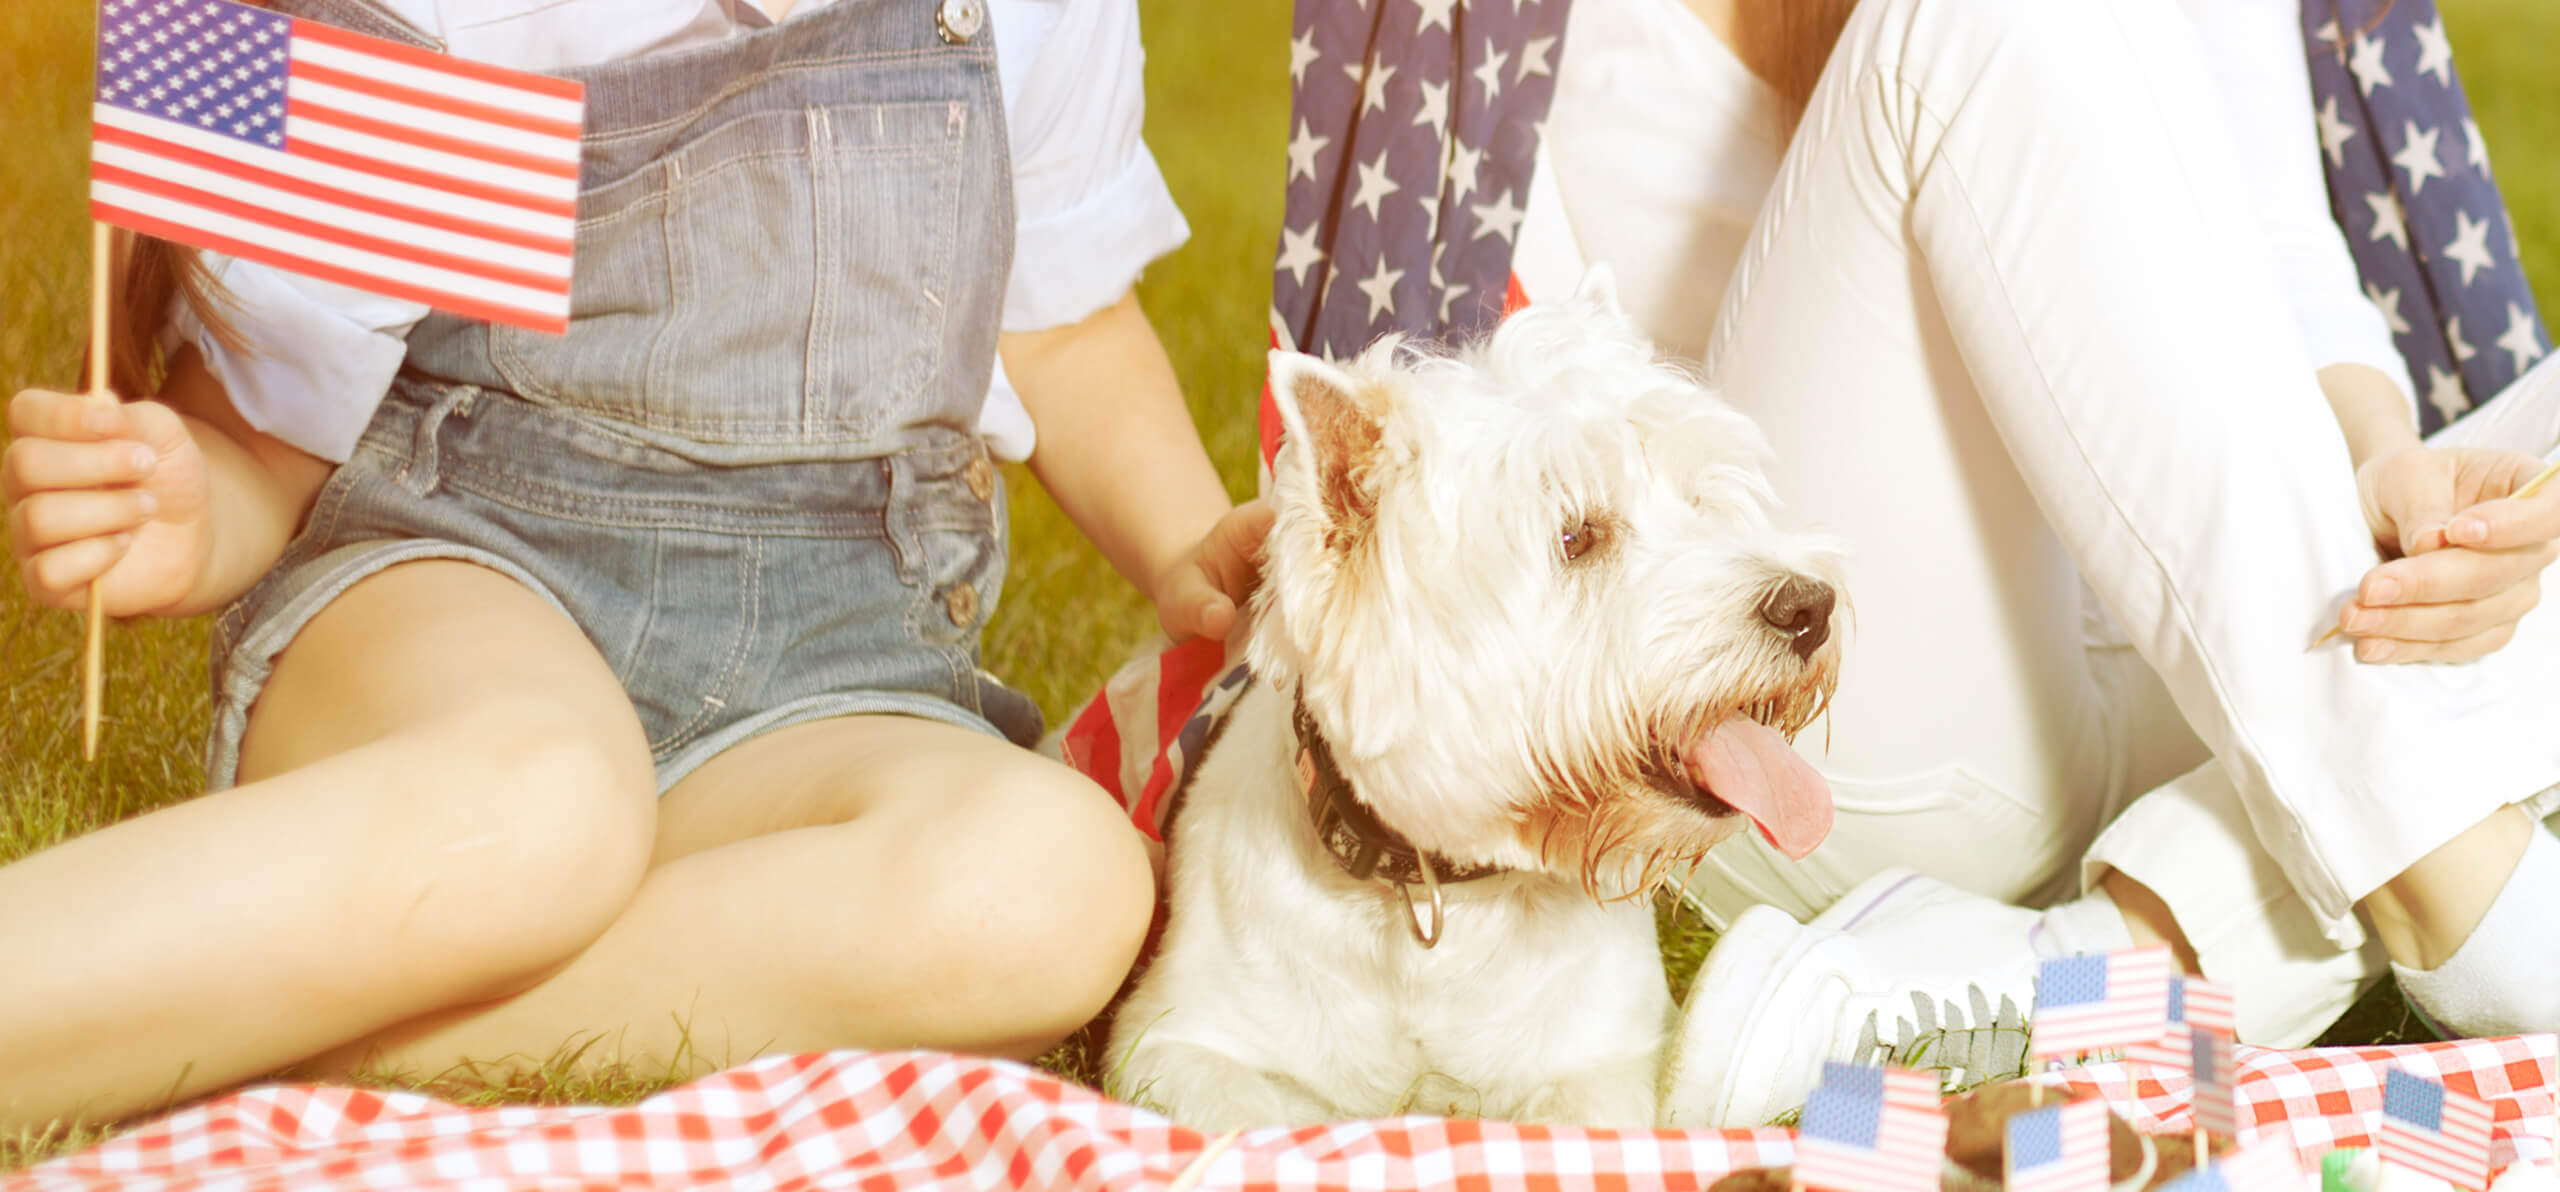 dog and two individuals laying a picnic blanket with usa flags